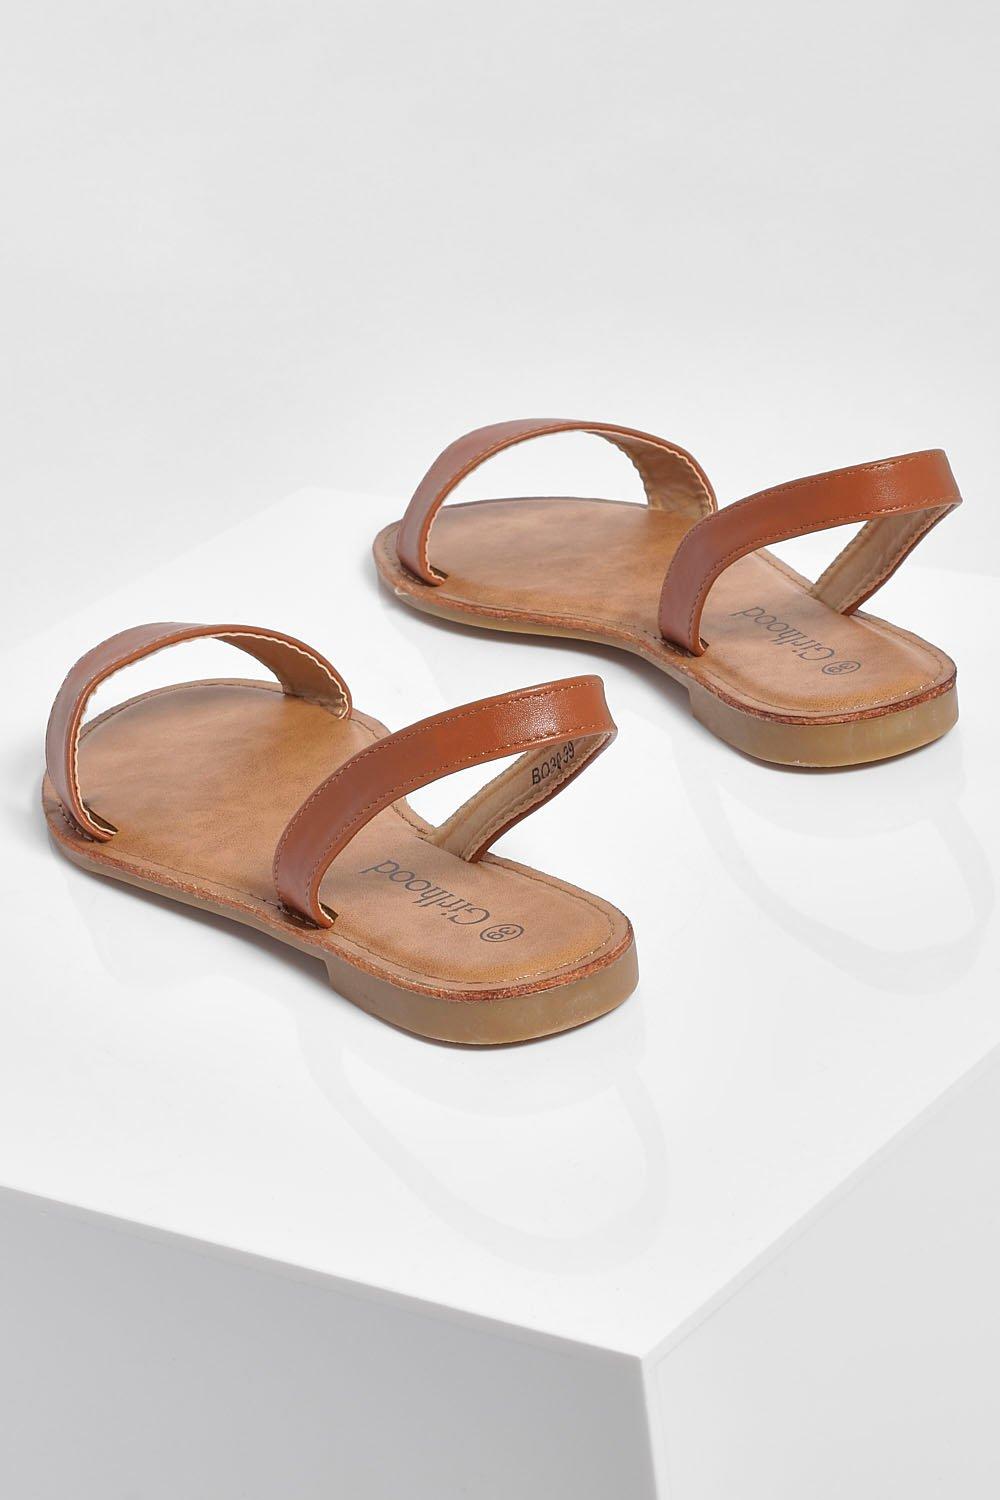 brown sandals with two straps